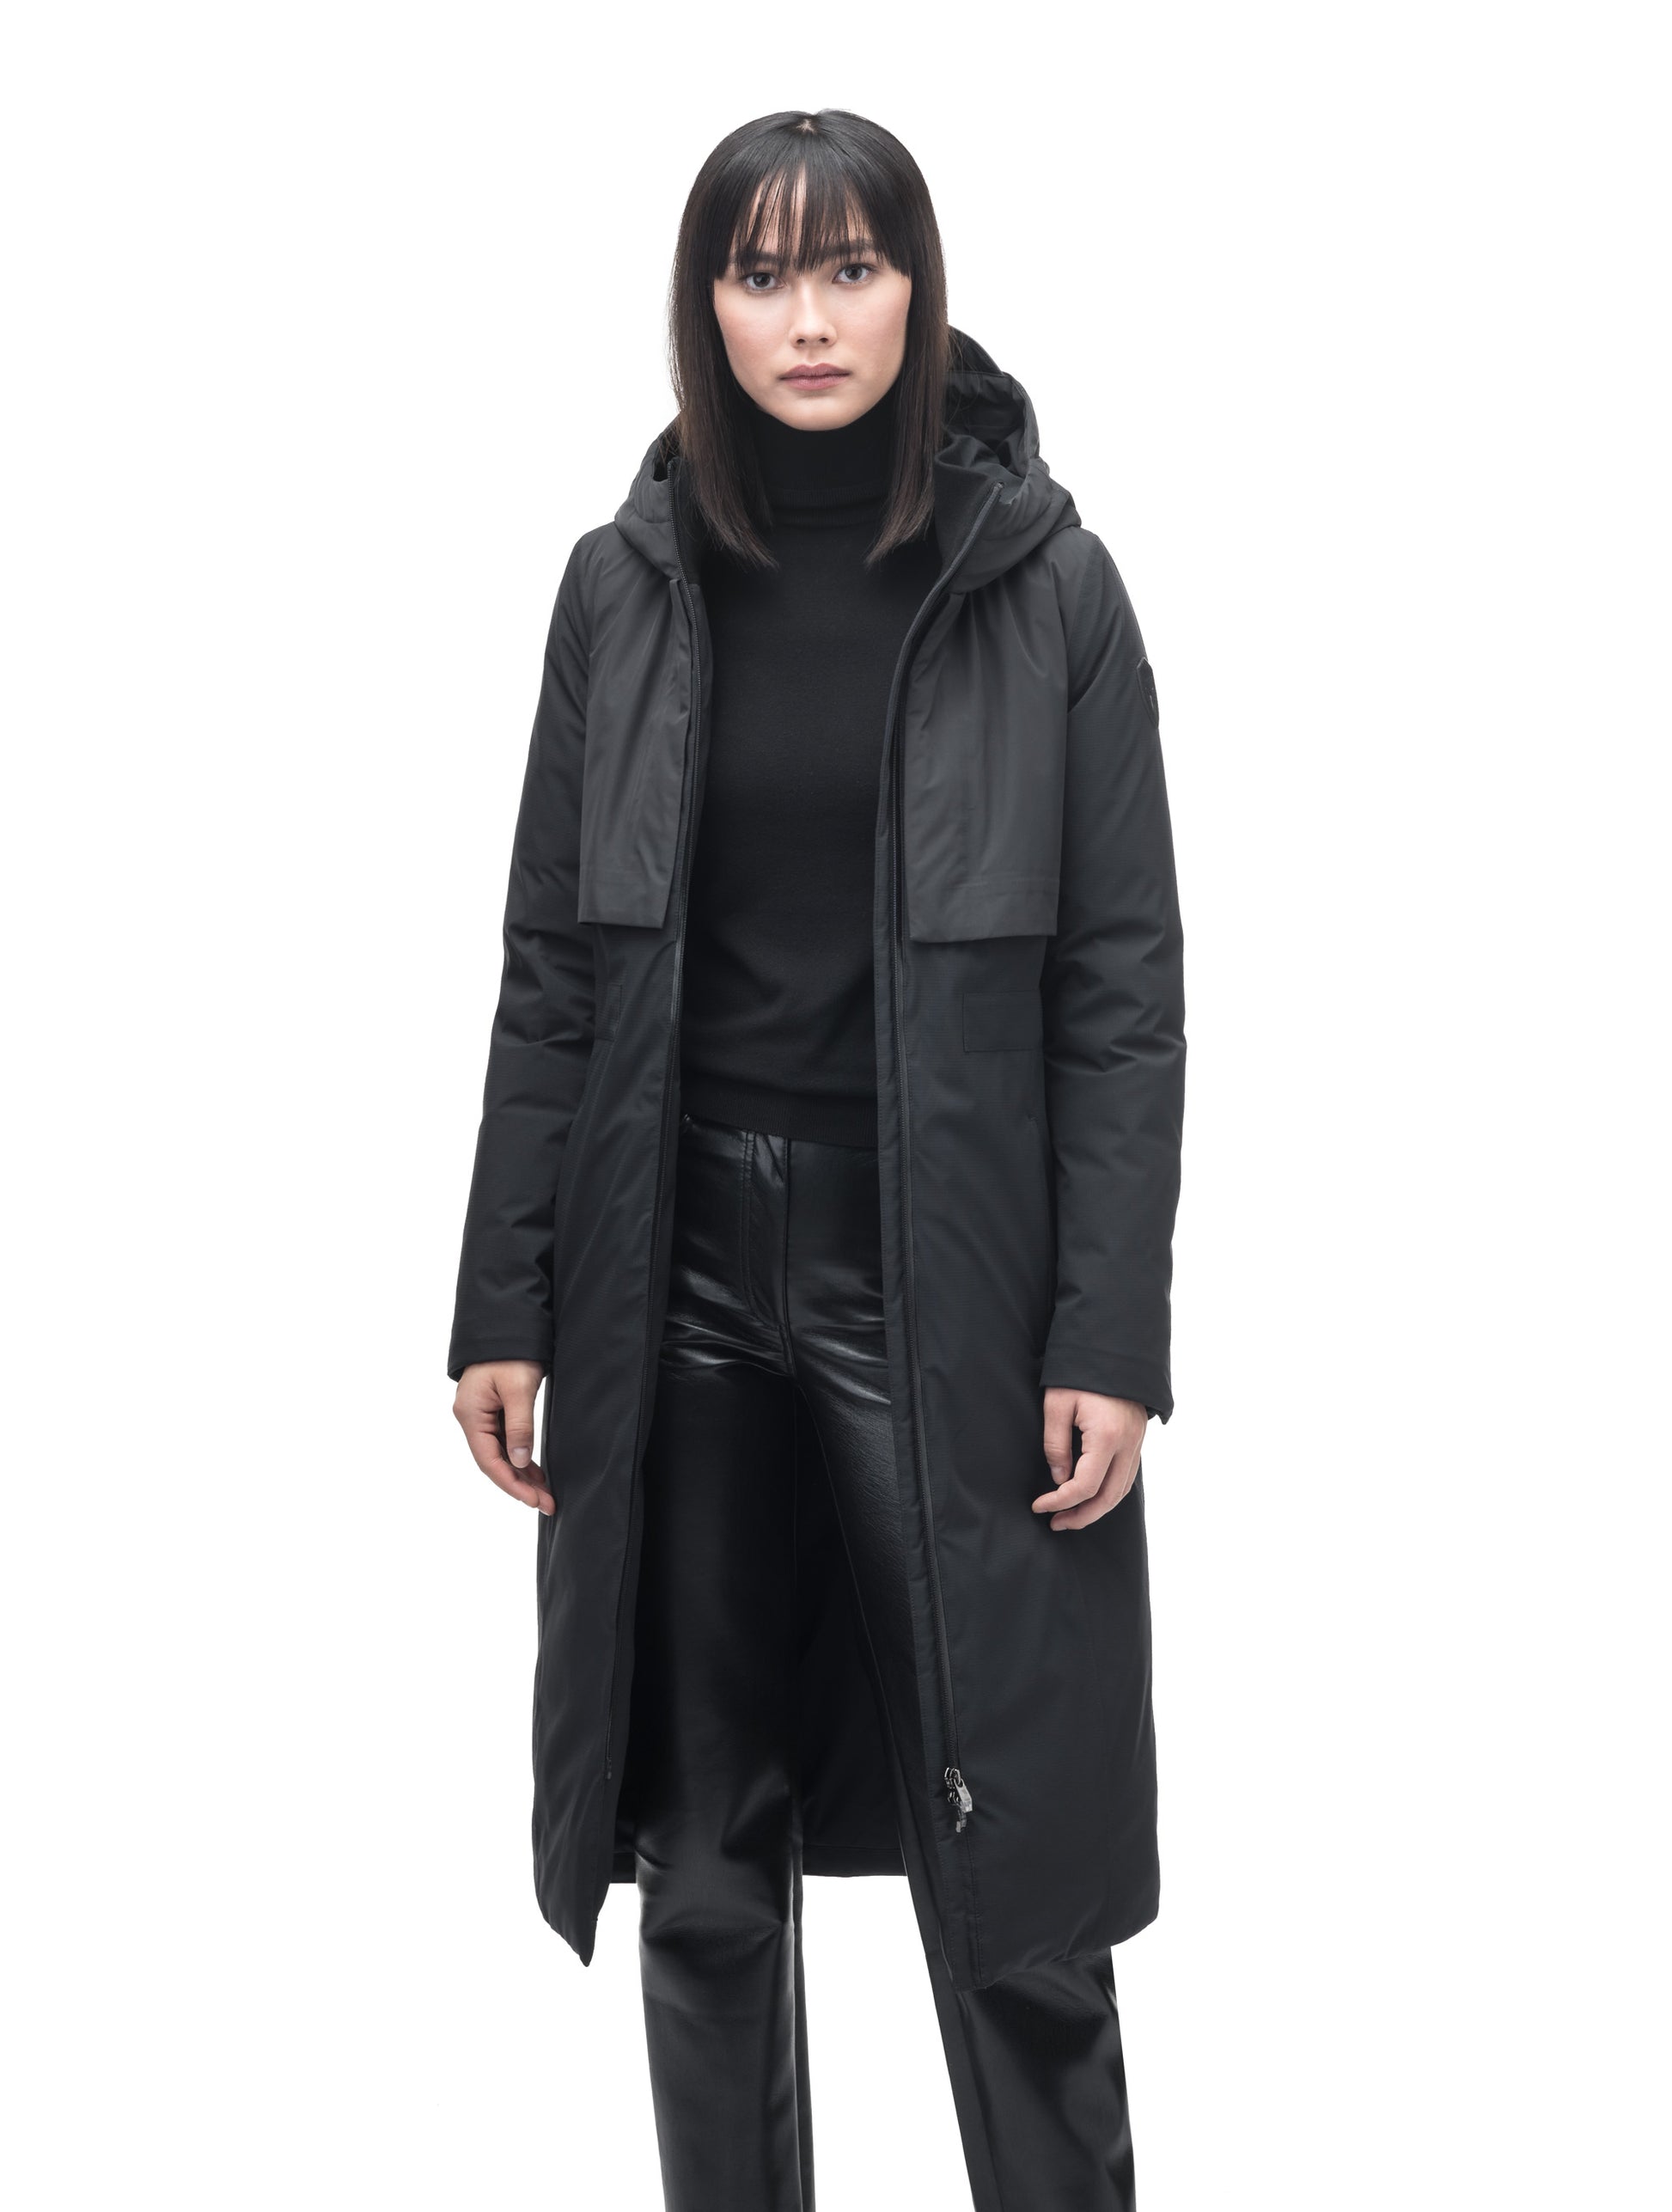 Iris Ladies Long Parka in below the knee length, Canadian duck down insulation, non-removable hood, and two-way zipper, in Black